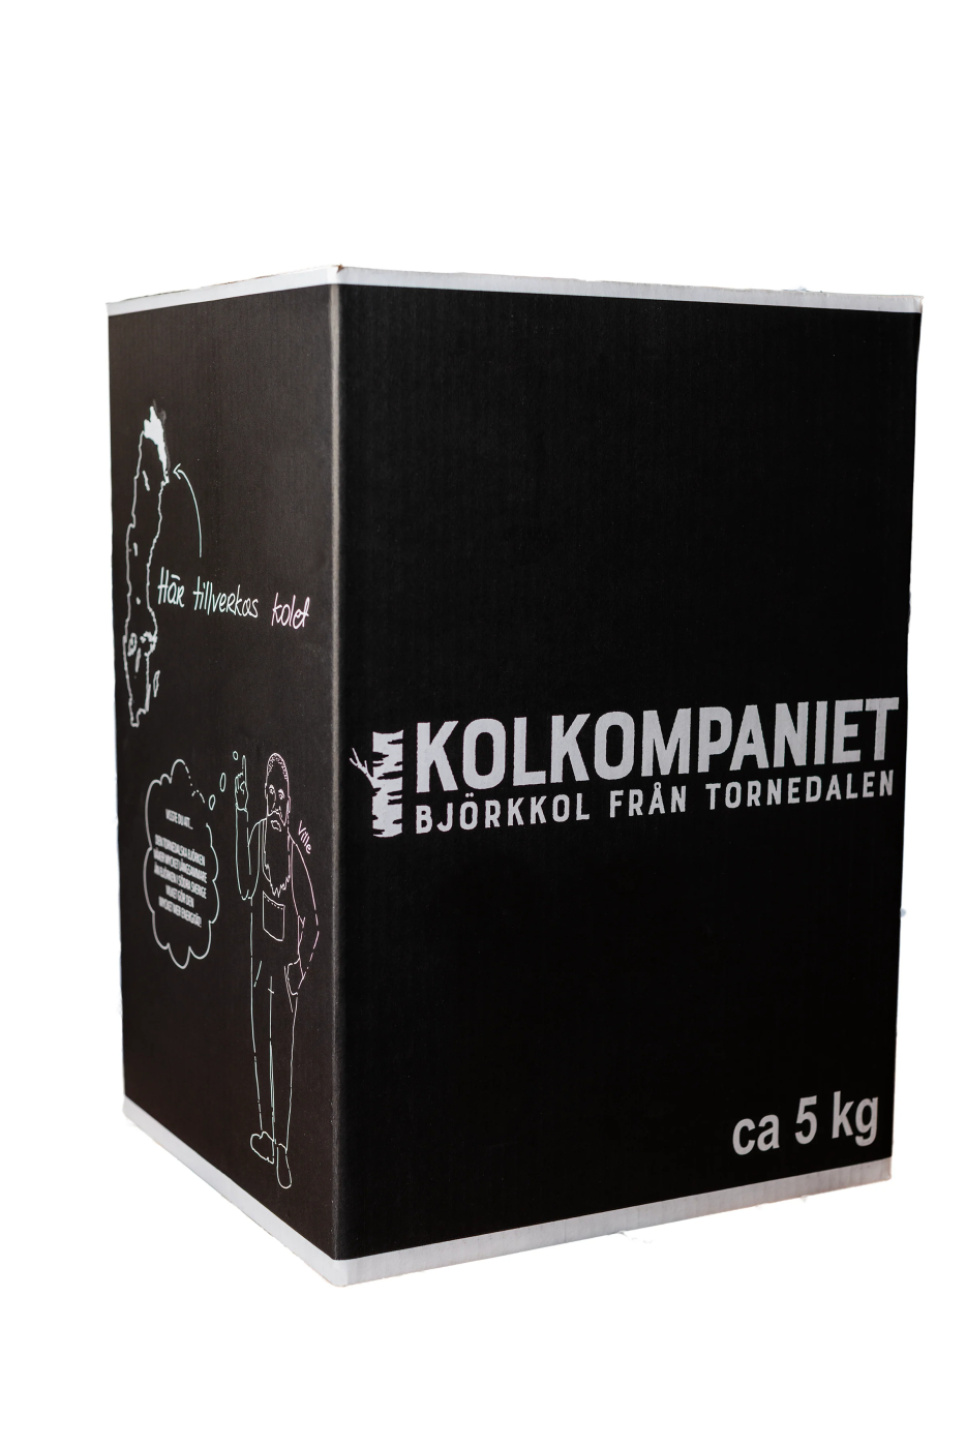 Birch charcoal from Tornedalen, 5 kg - Kolkompaniet in the group Barbecues, Stoves & Ovens / Barbecue charcoal & briquettes / charcoal at KitchenLab (2169-28563)